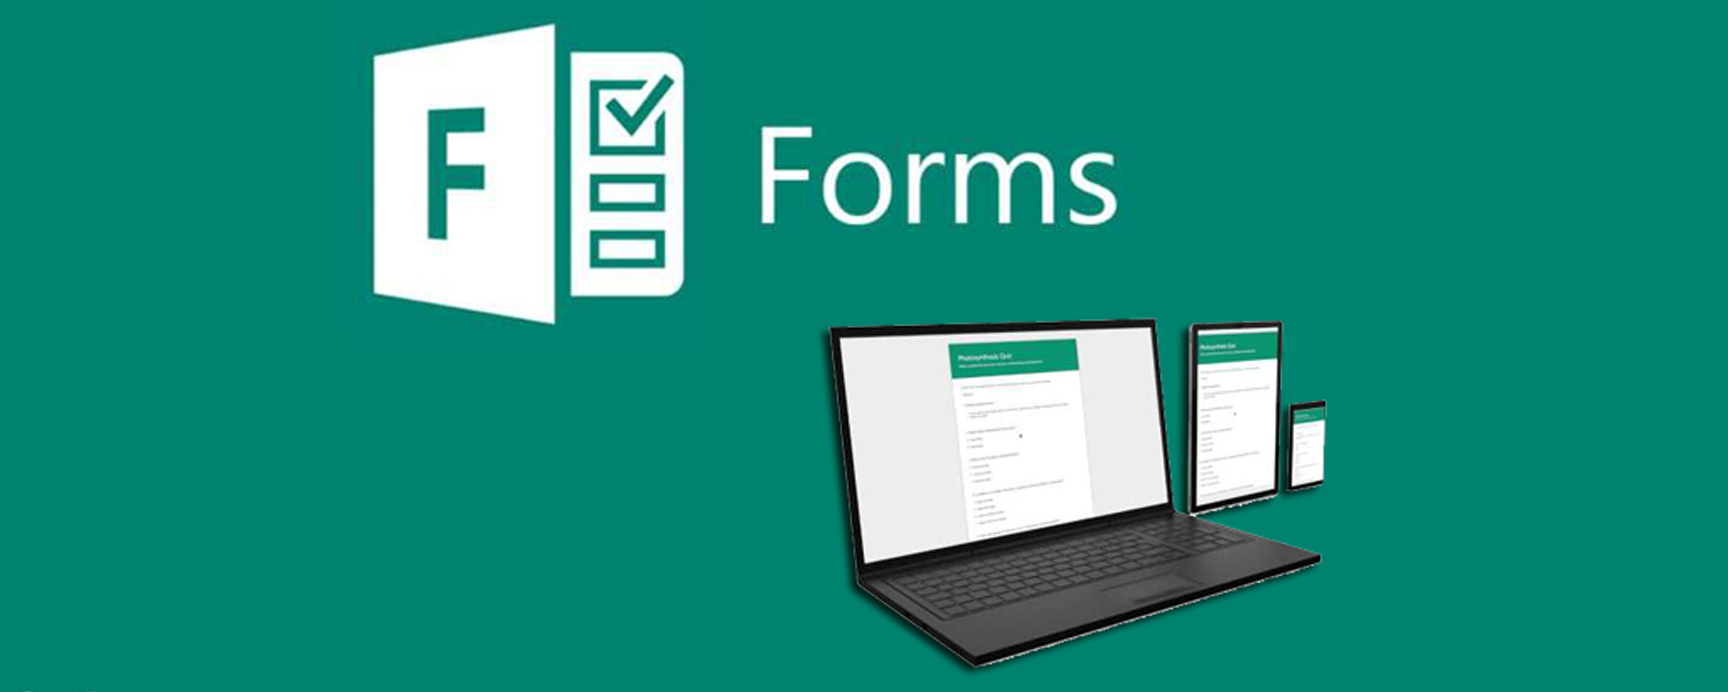 Microsoft Forms Microsoft Forms Everything You Should - vrogue.co